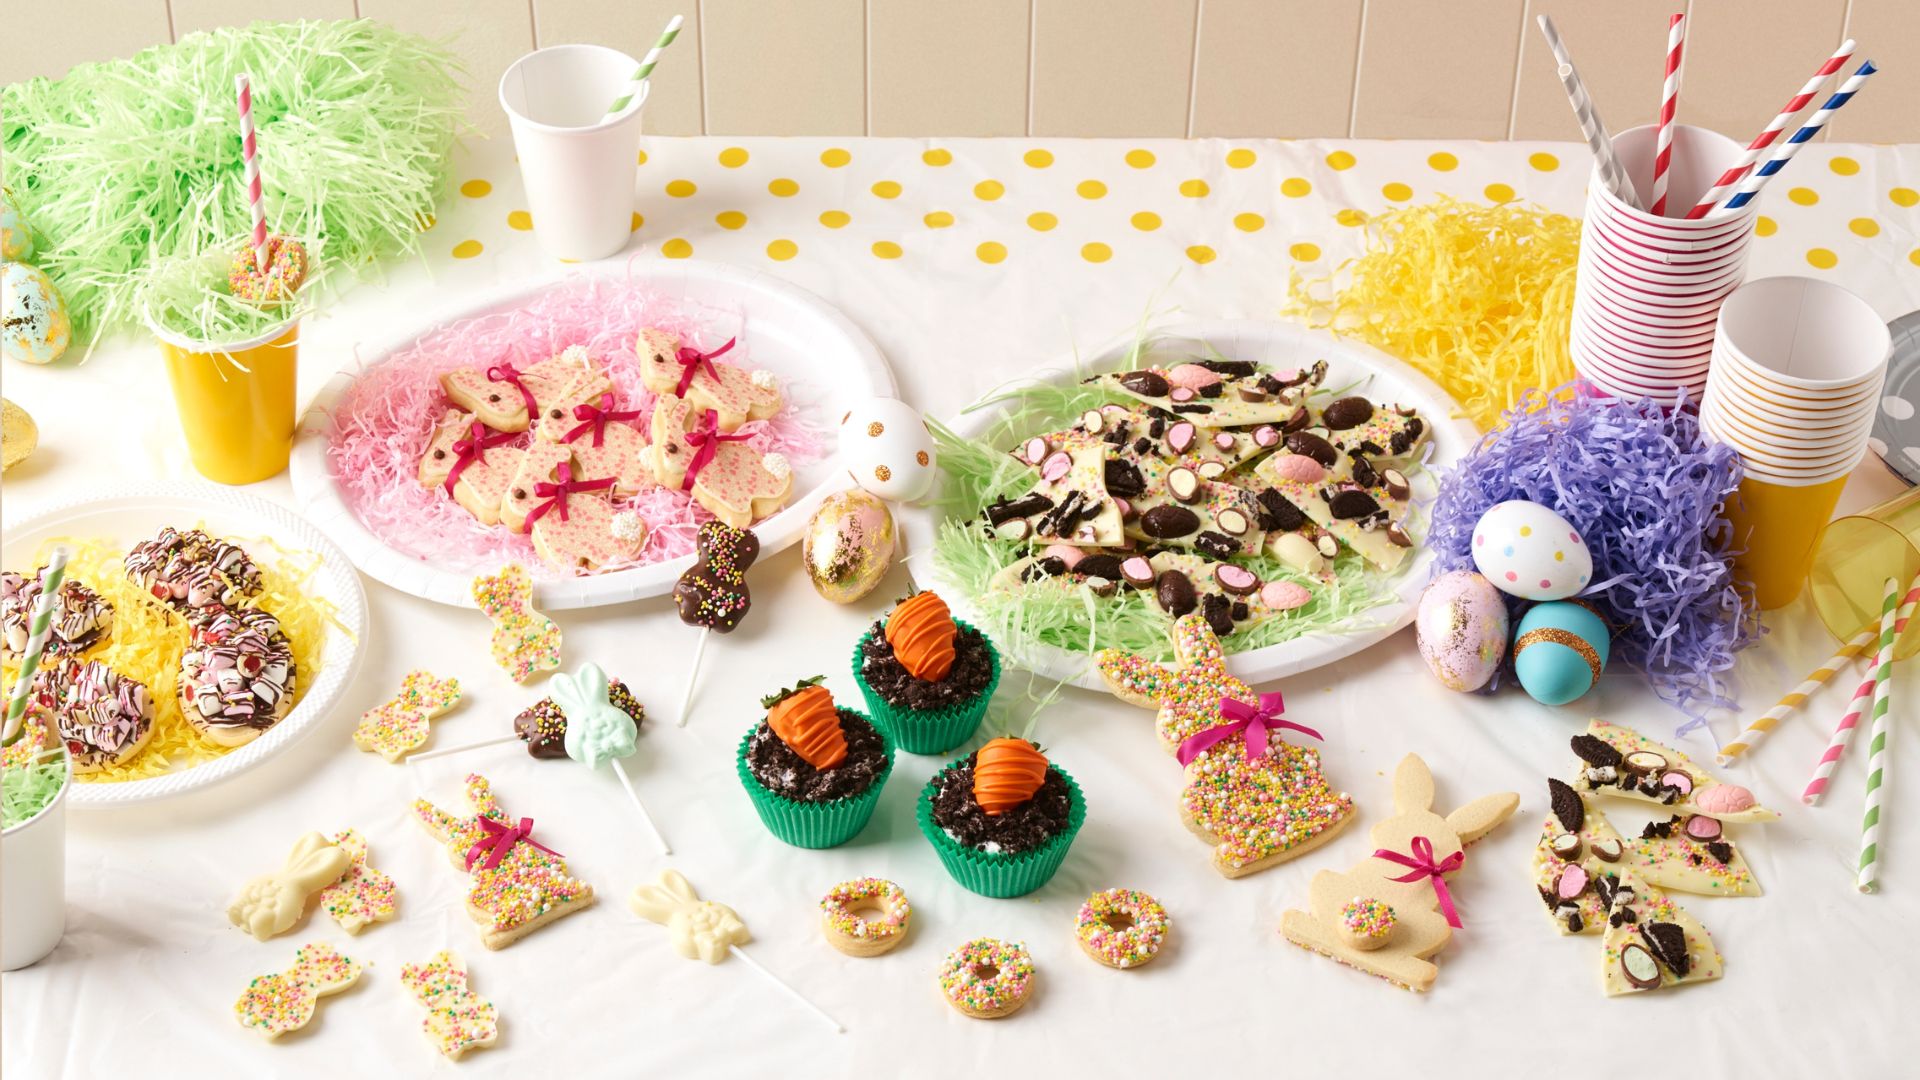 Chocolate cupcakes with carrot decoration, sprinkle bunny cookies & Easter-egg white chocolate bark